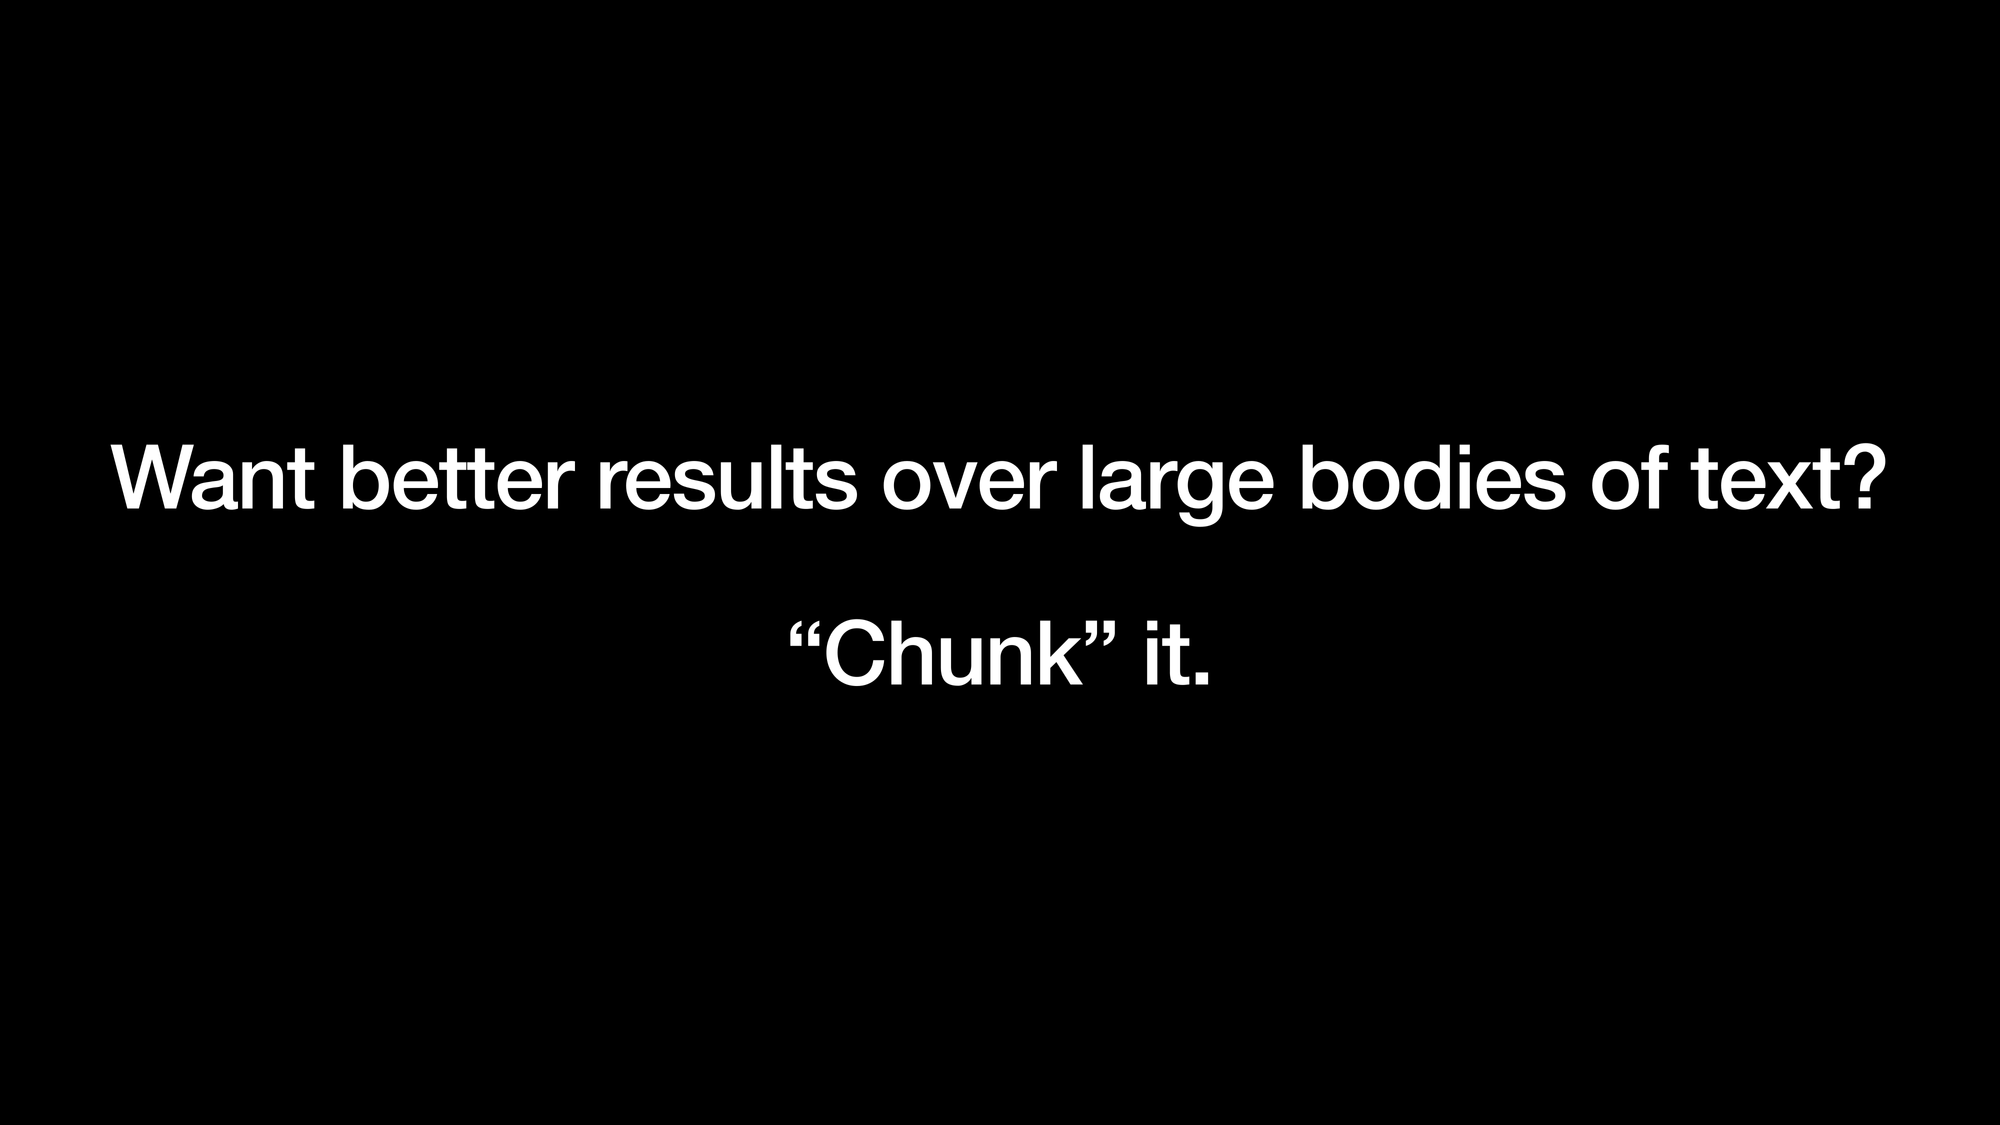 Want better results over large bodies of text? “Chunk” it.